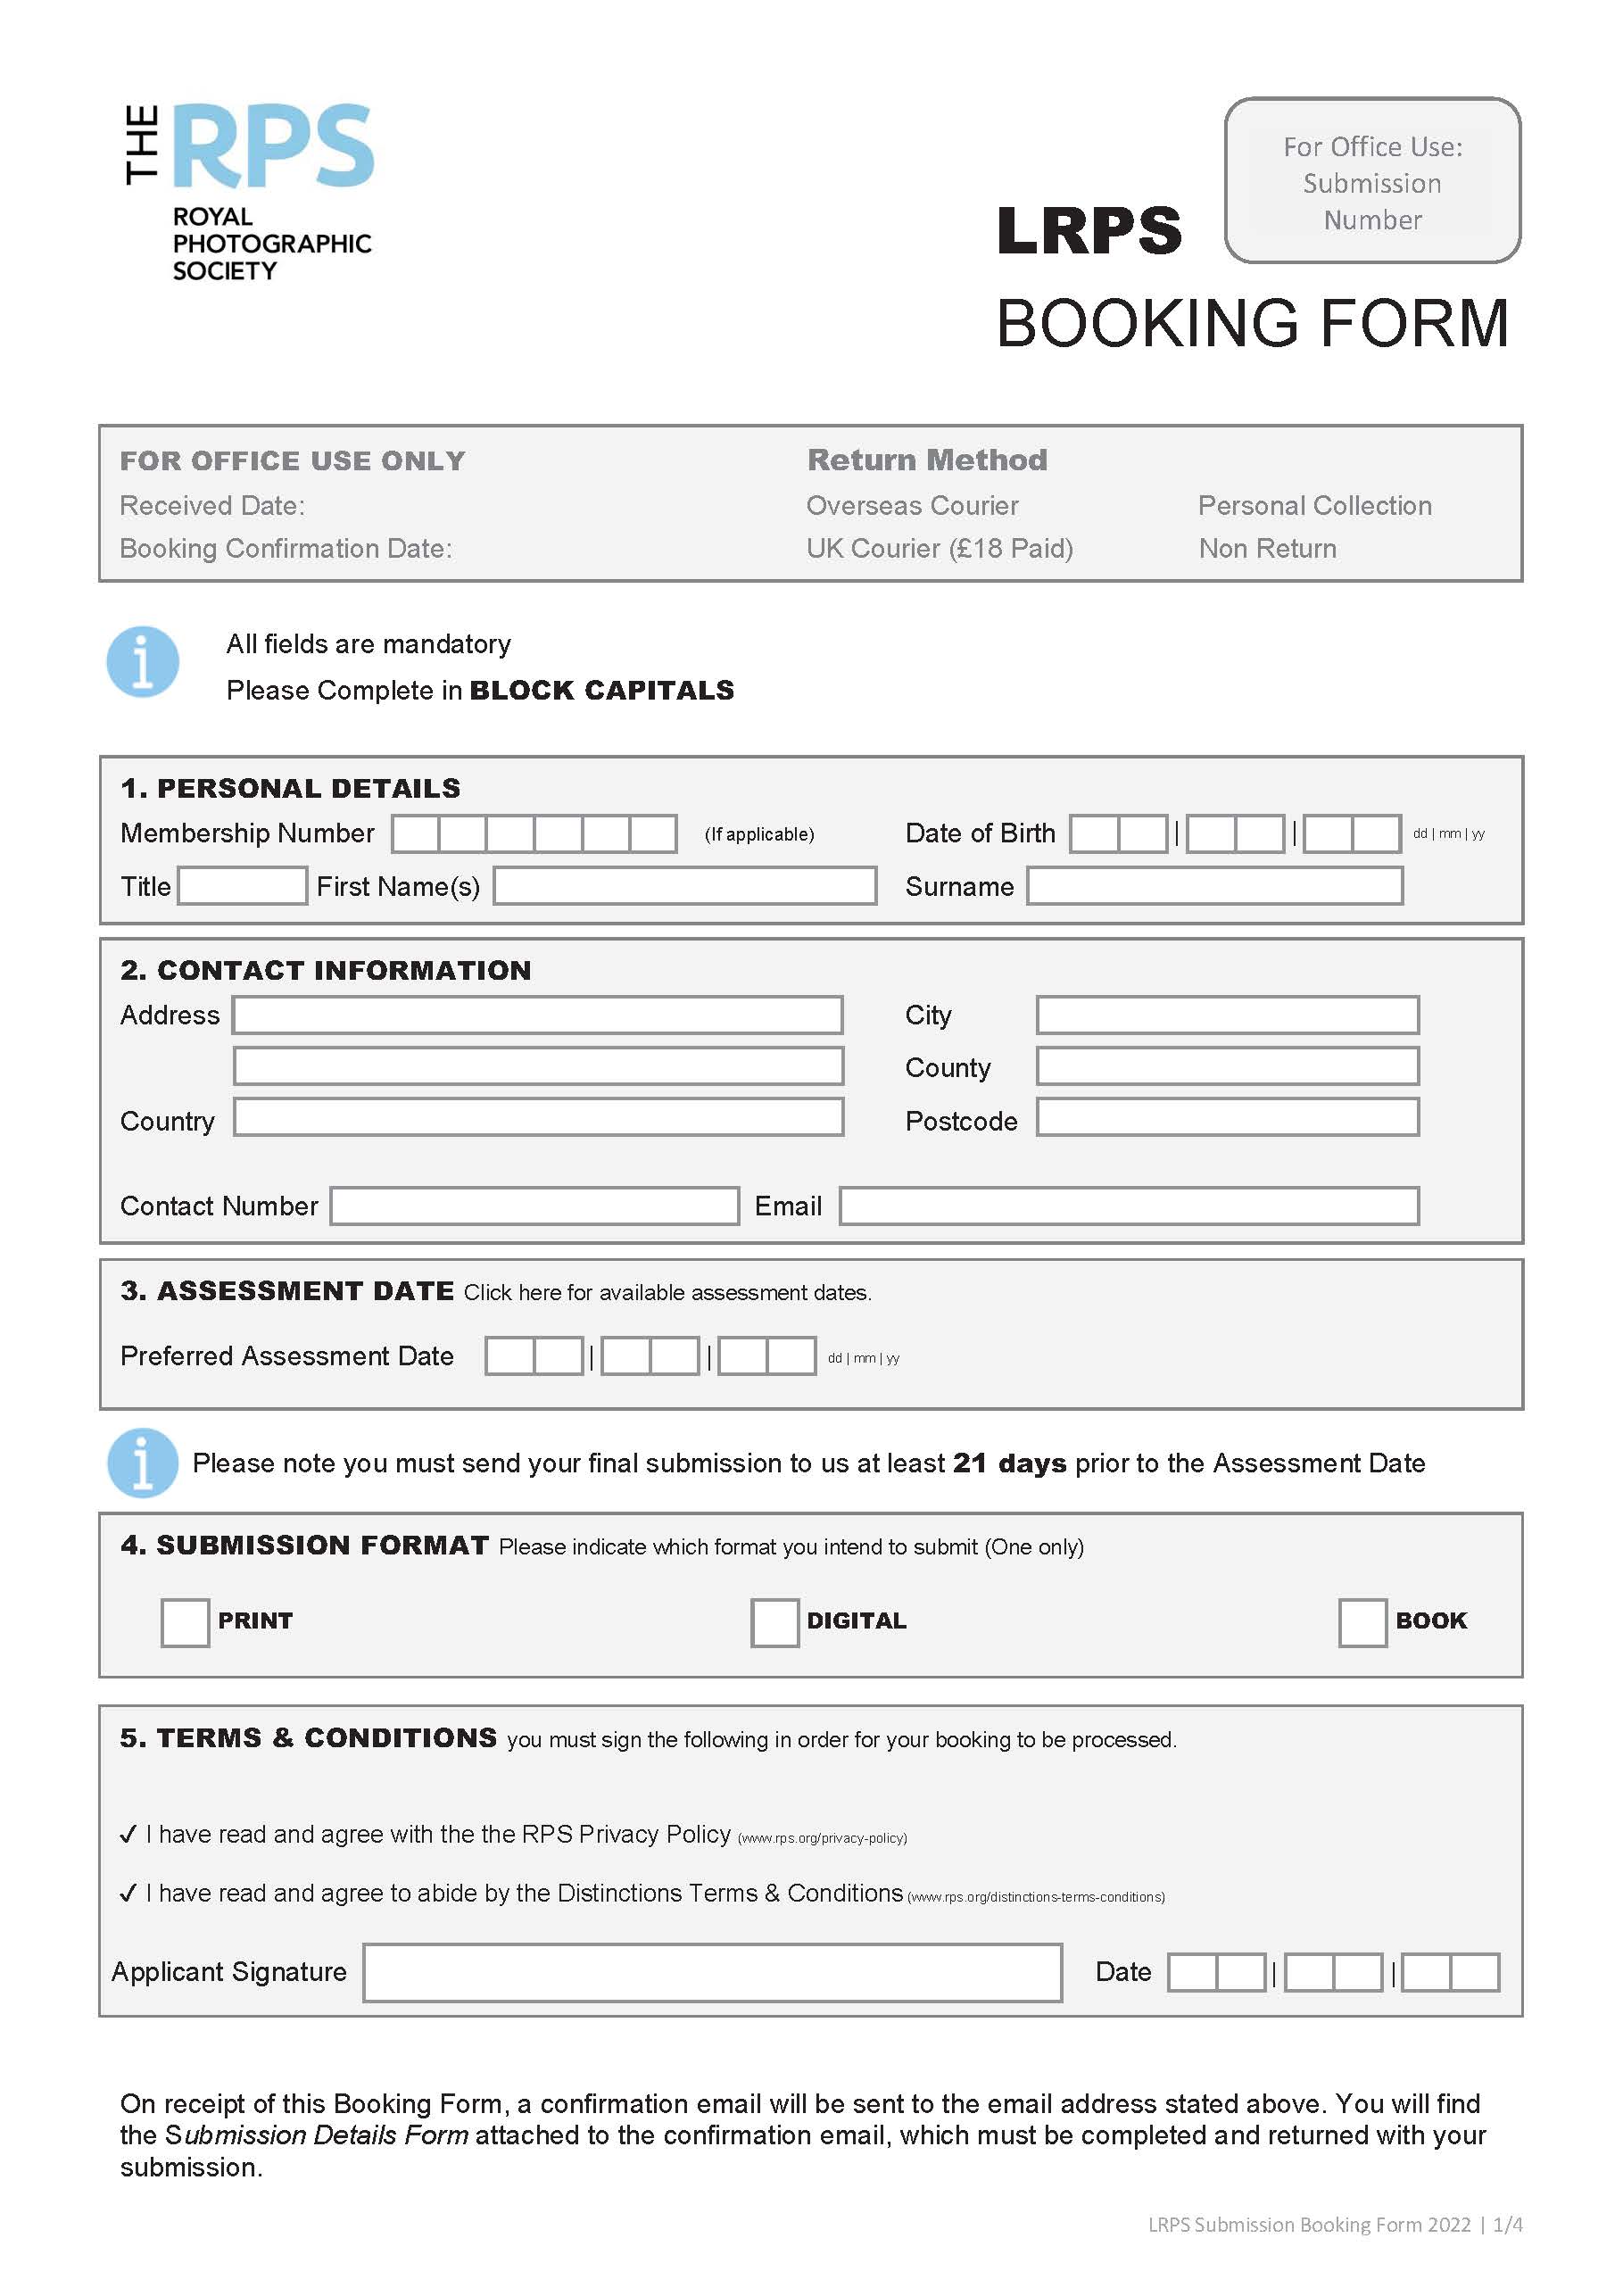 2022 LRPS Booking Form V.1 Cover